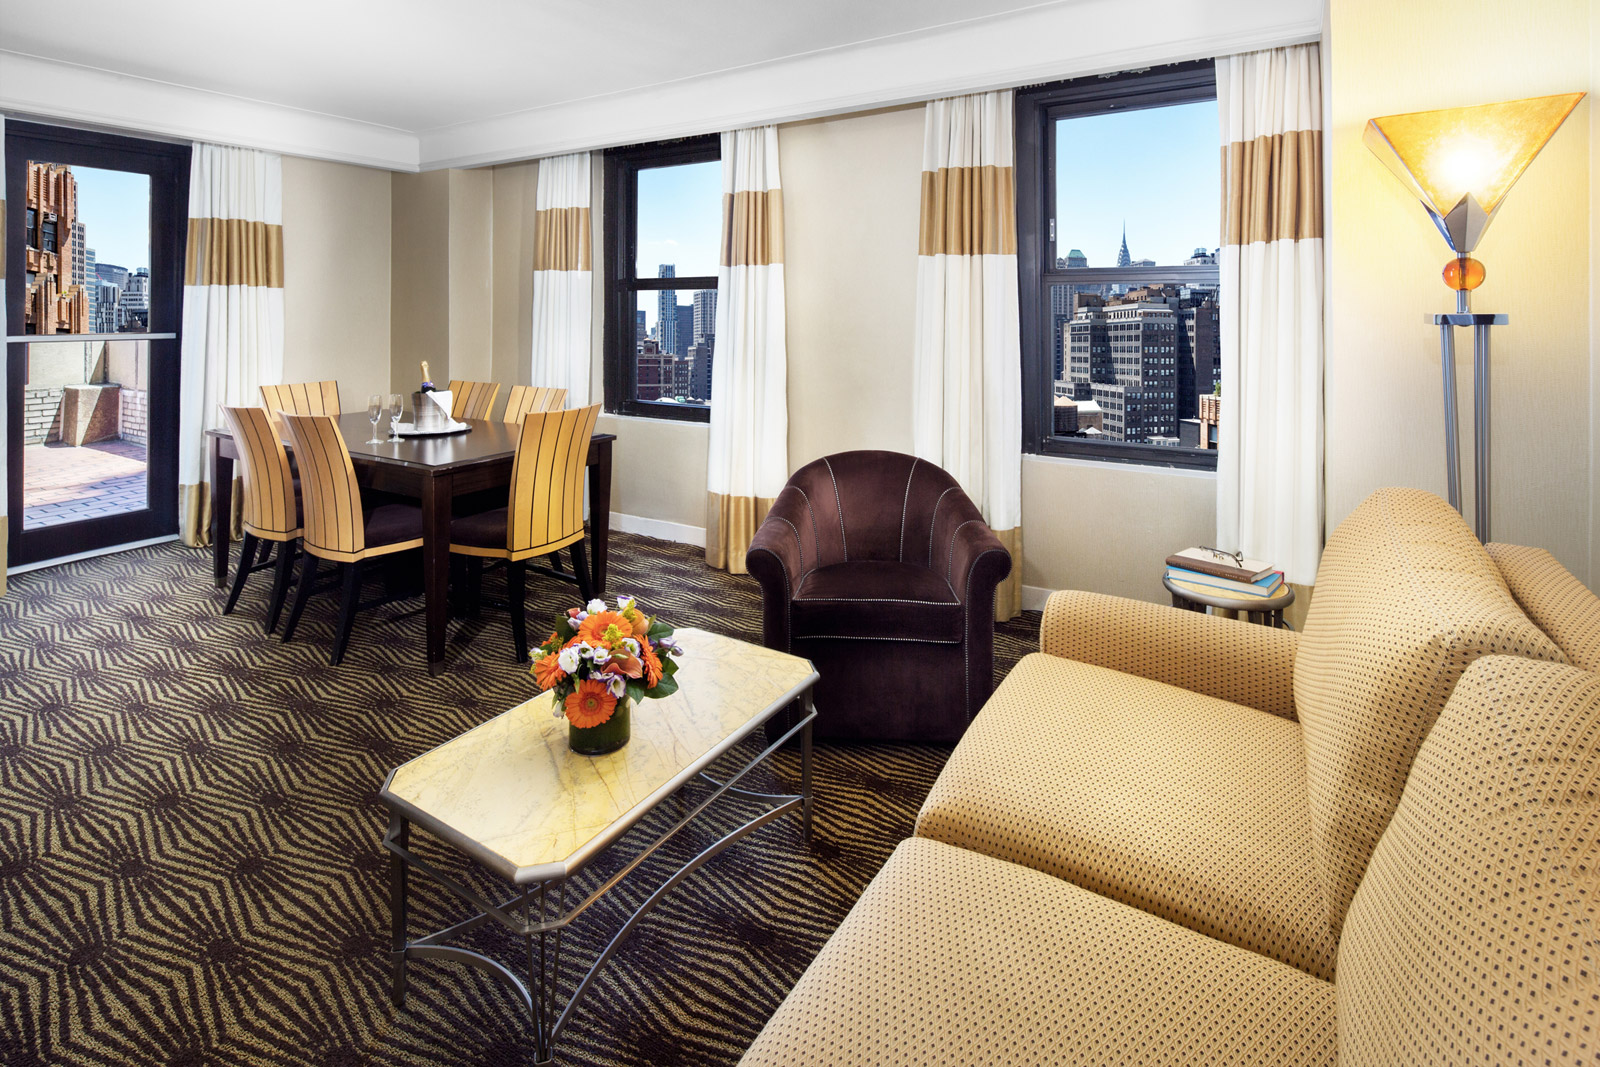 The New Yorker, A Wyndham Hotel, New York, NY 